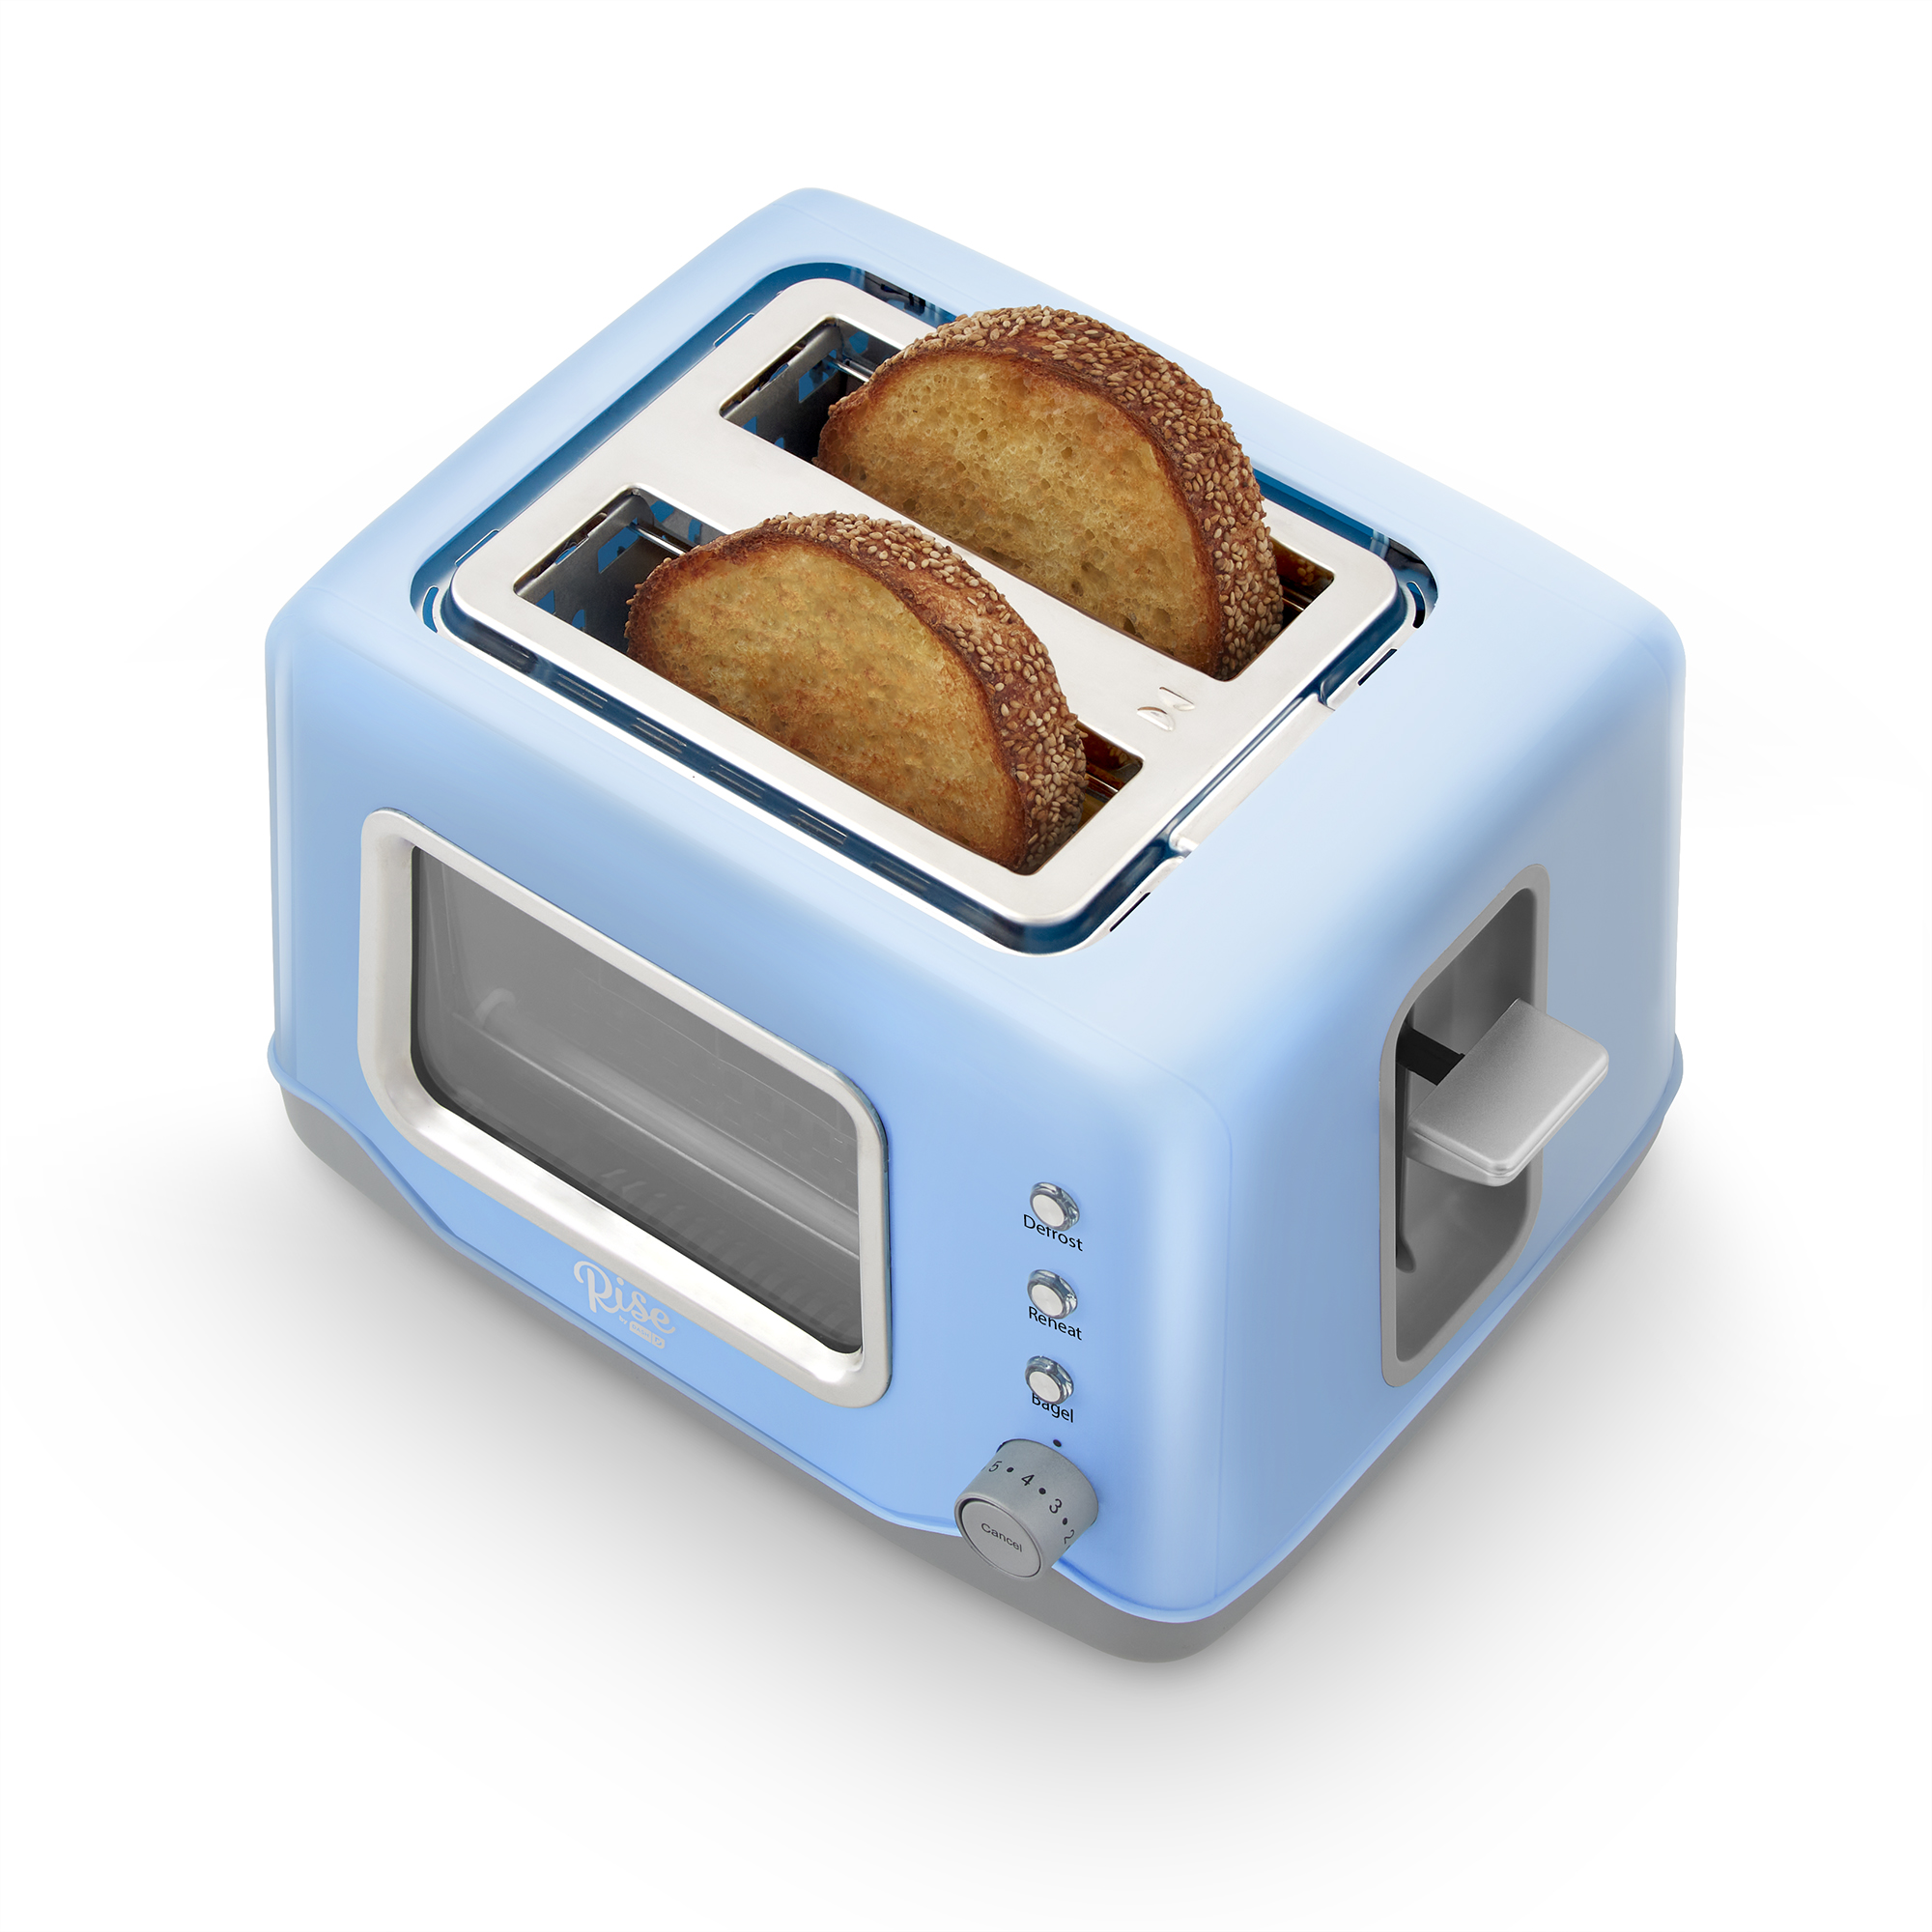 Rise by Dash Clear View Window 2-Slice Toaster Blue - Defrost, Reheat, Bagel, Auto Shut off, New - image 2 of 7